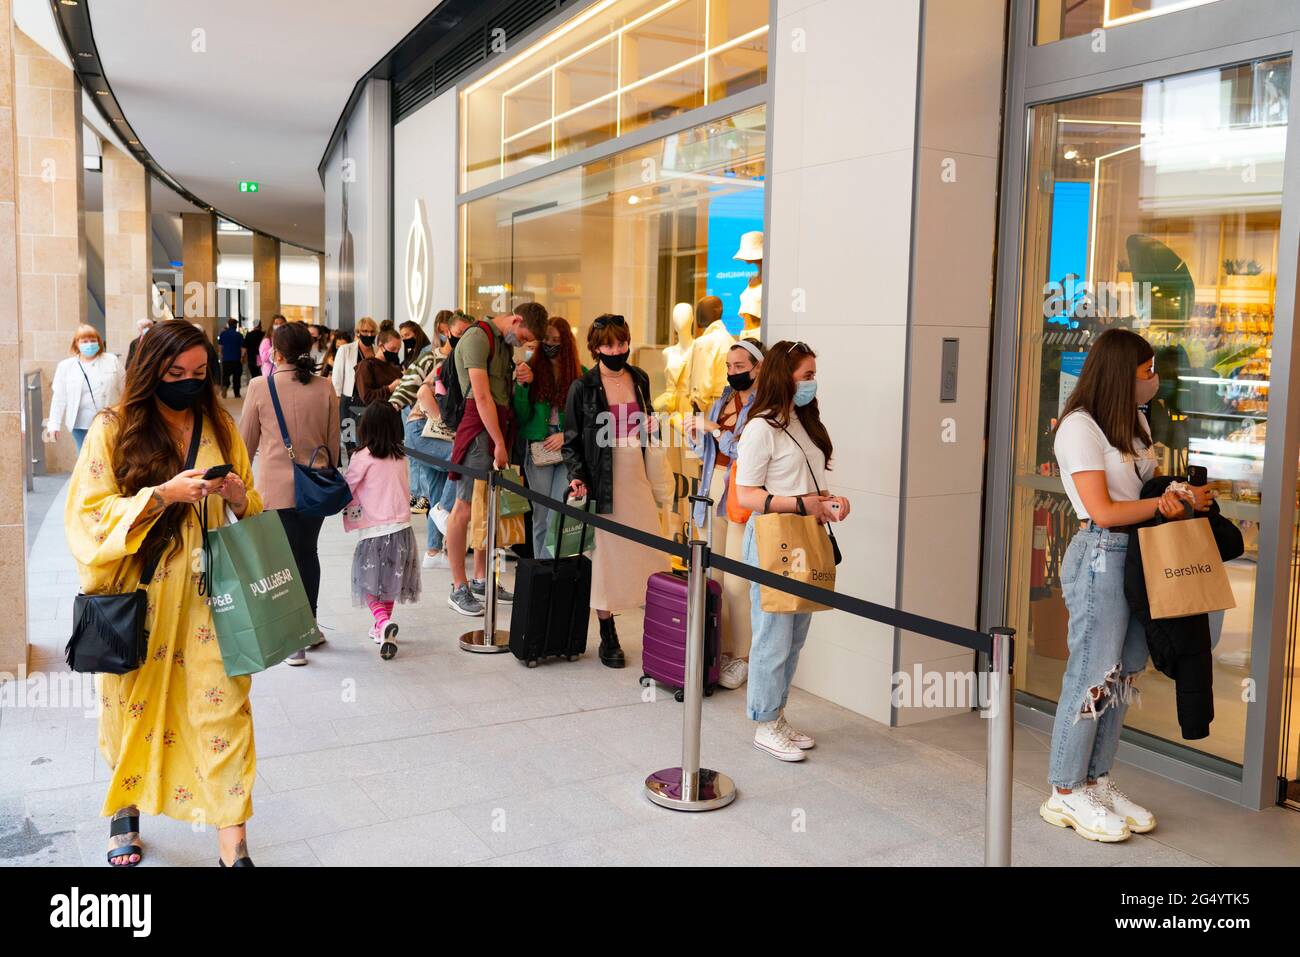 Edinburgh, Scotland, UK. 24 June 2021. First images of the new St James Quarter which opened this morning in Edinburgh. The large retail and residential complex replaced the St James Centre which occupied the site for many years. Pic； Long queue of shoppers outside Stradivarius shop. Iain Masterton/Alamy Live News Stock Photo